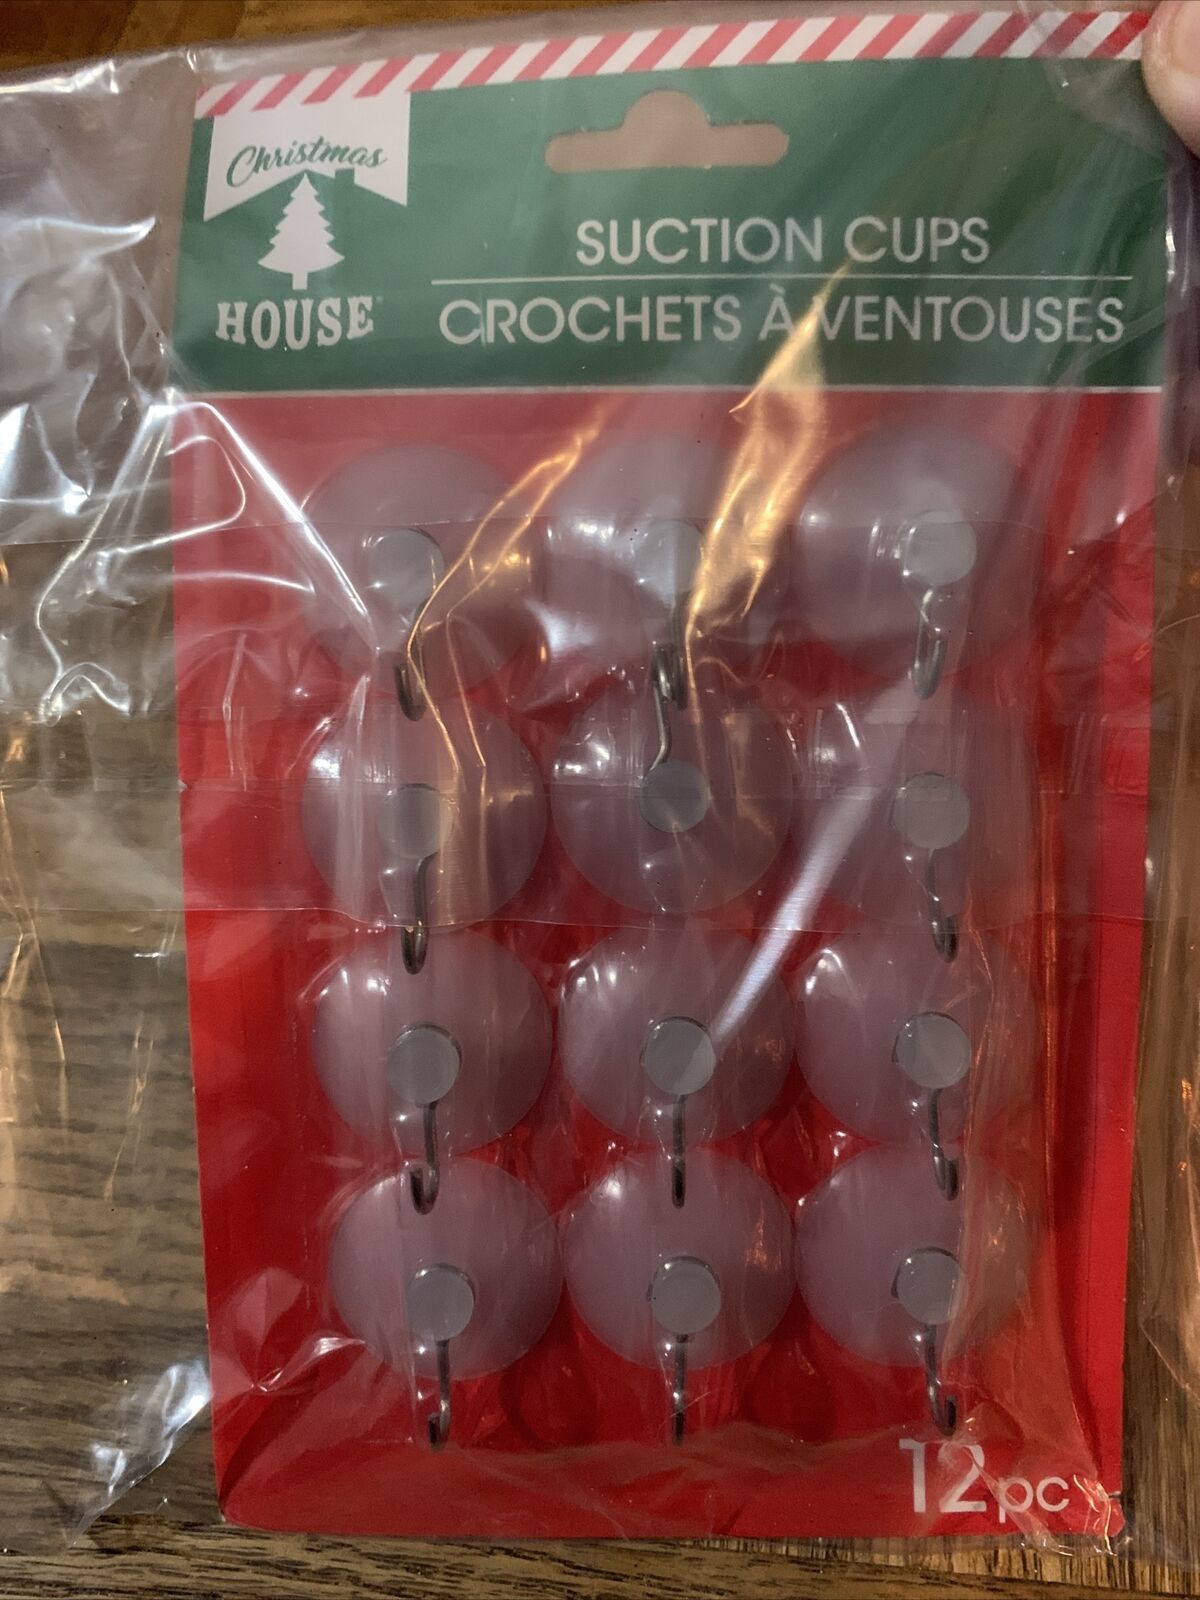 Christmas House Christmas Suction Cups-1pkg of 12 Cups-Brand New-SHIPS N 24 HOUR - $11.76